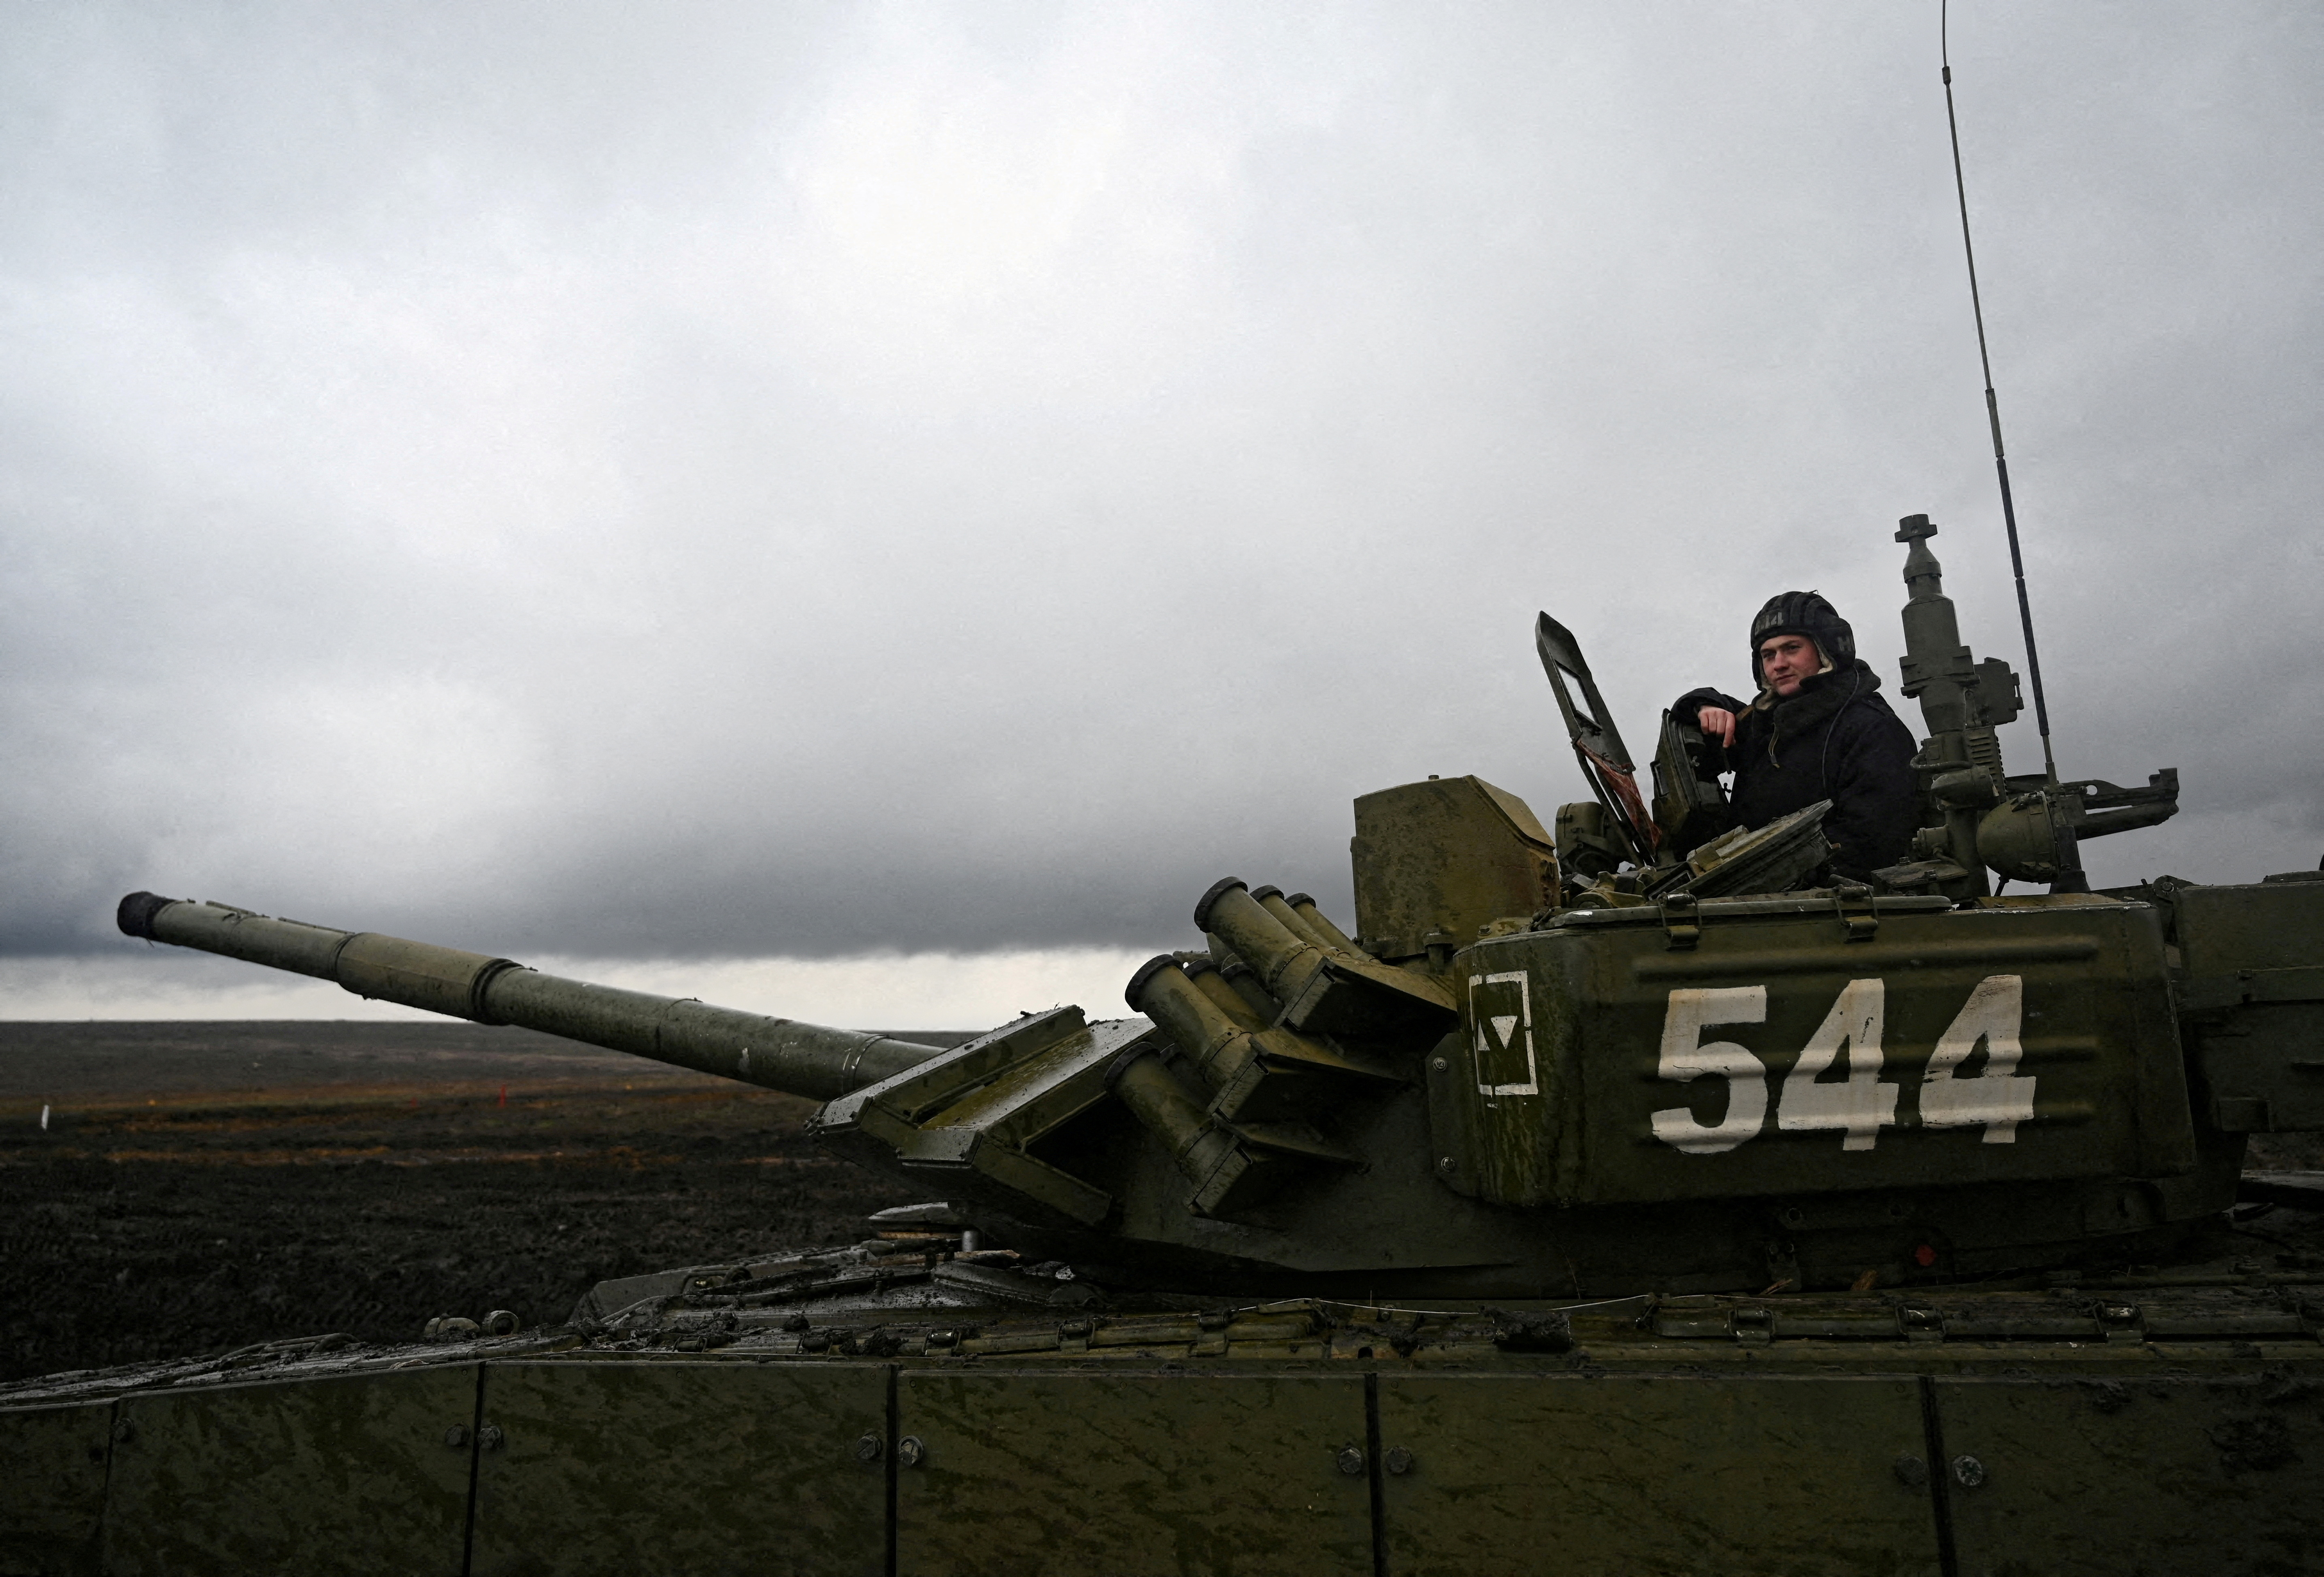 A Russian service member is seen atop a T-72B3 main battle tank during military drills at the Kadamovsky range in the Rostov region, Russia December 20, 2021